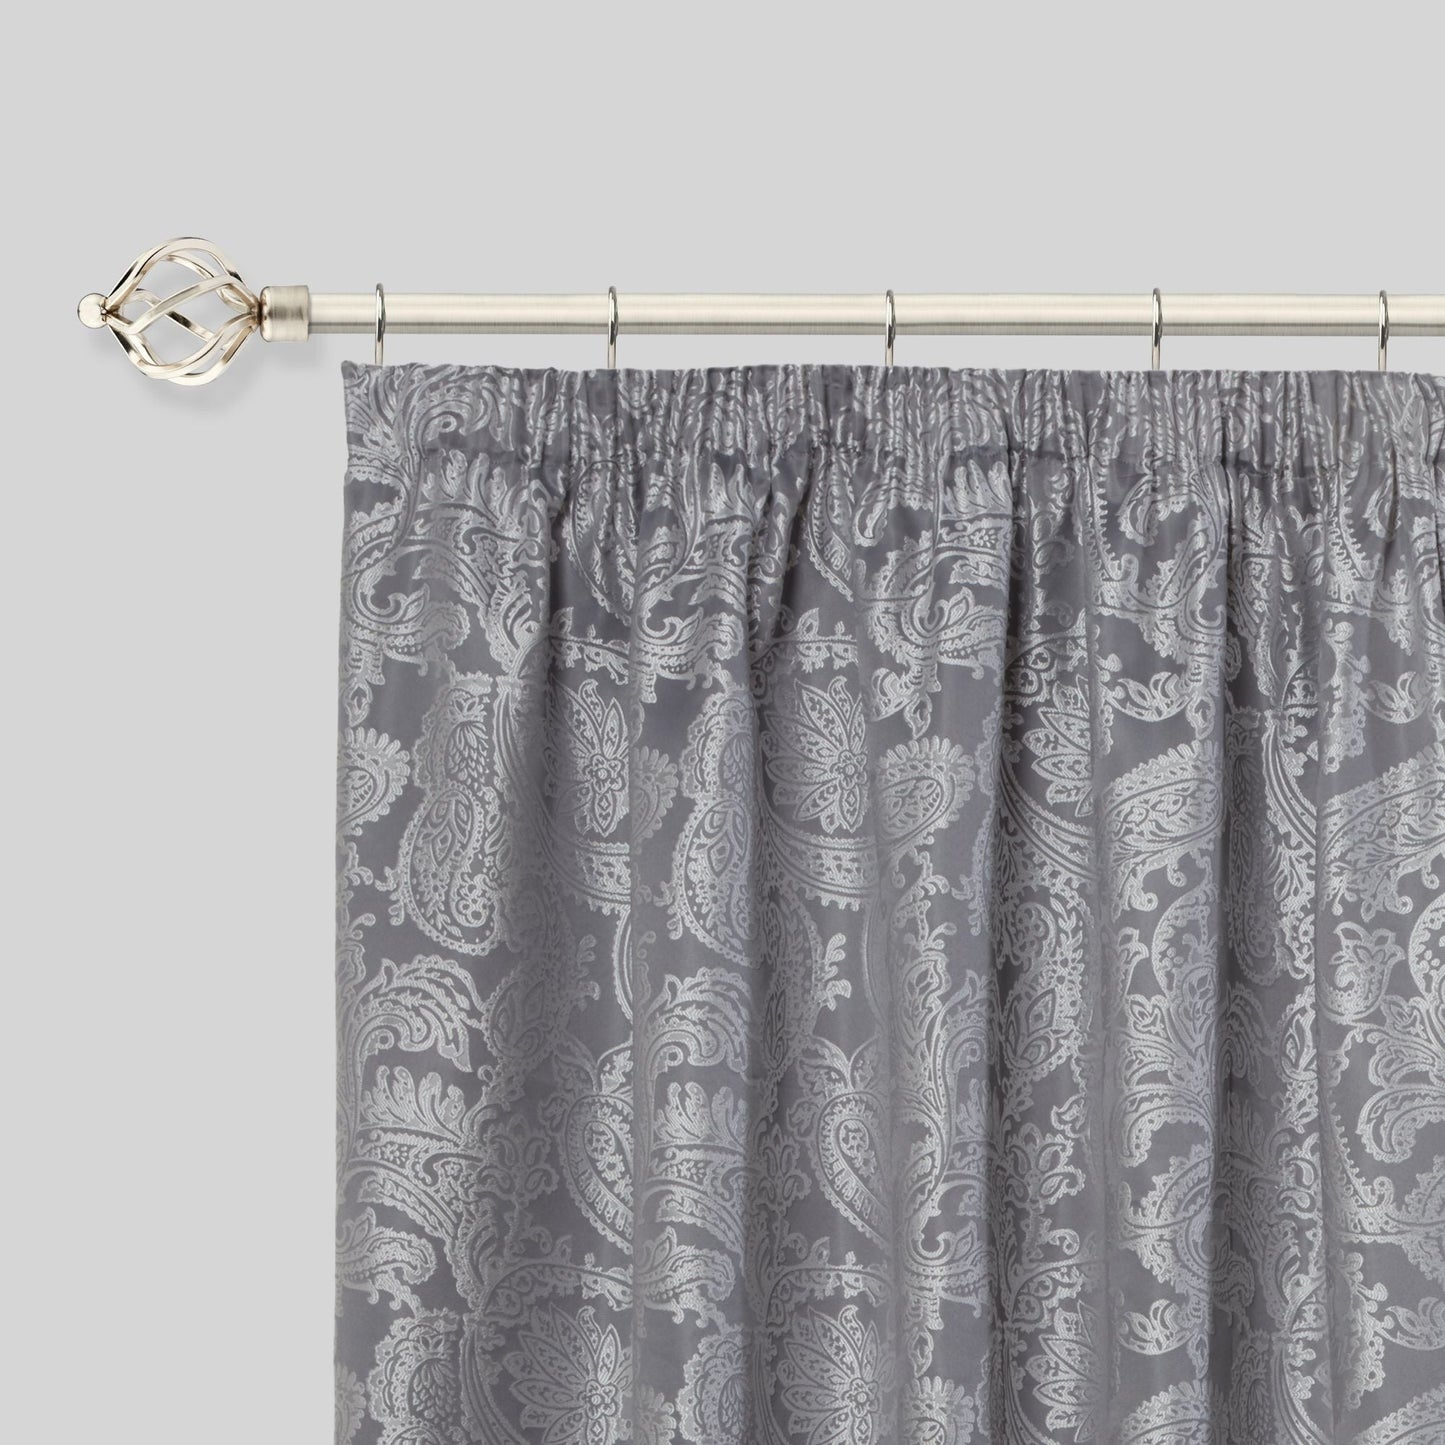 Brushed Silver Bird Cage Extendable Curtain Pole with Rings